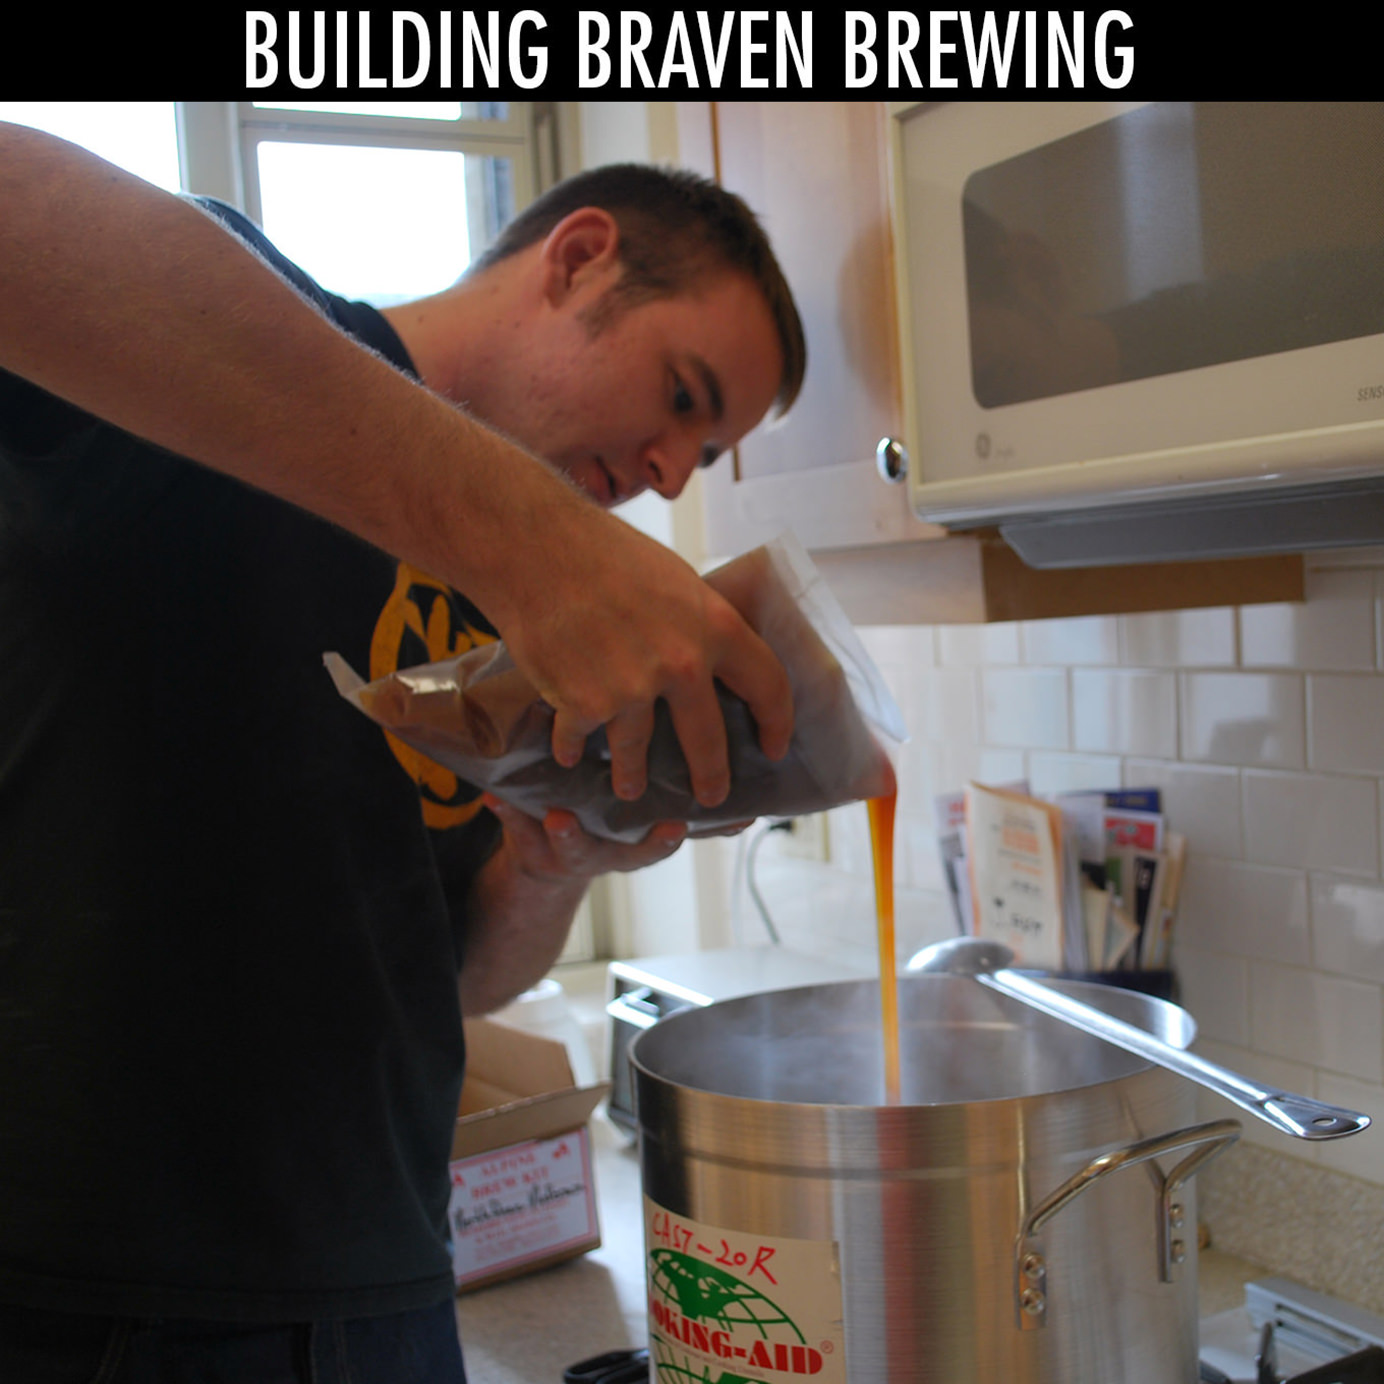 Building Braven Brewing #1: Bushwick’s First Craft Brewery Is Born